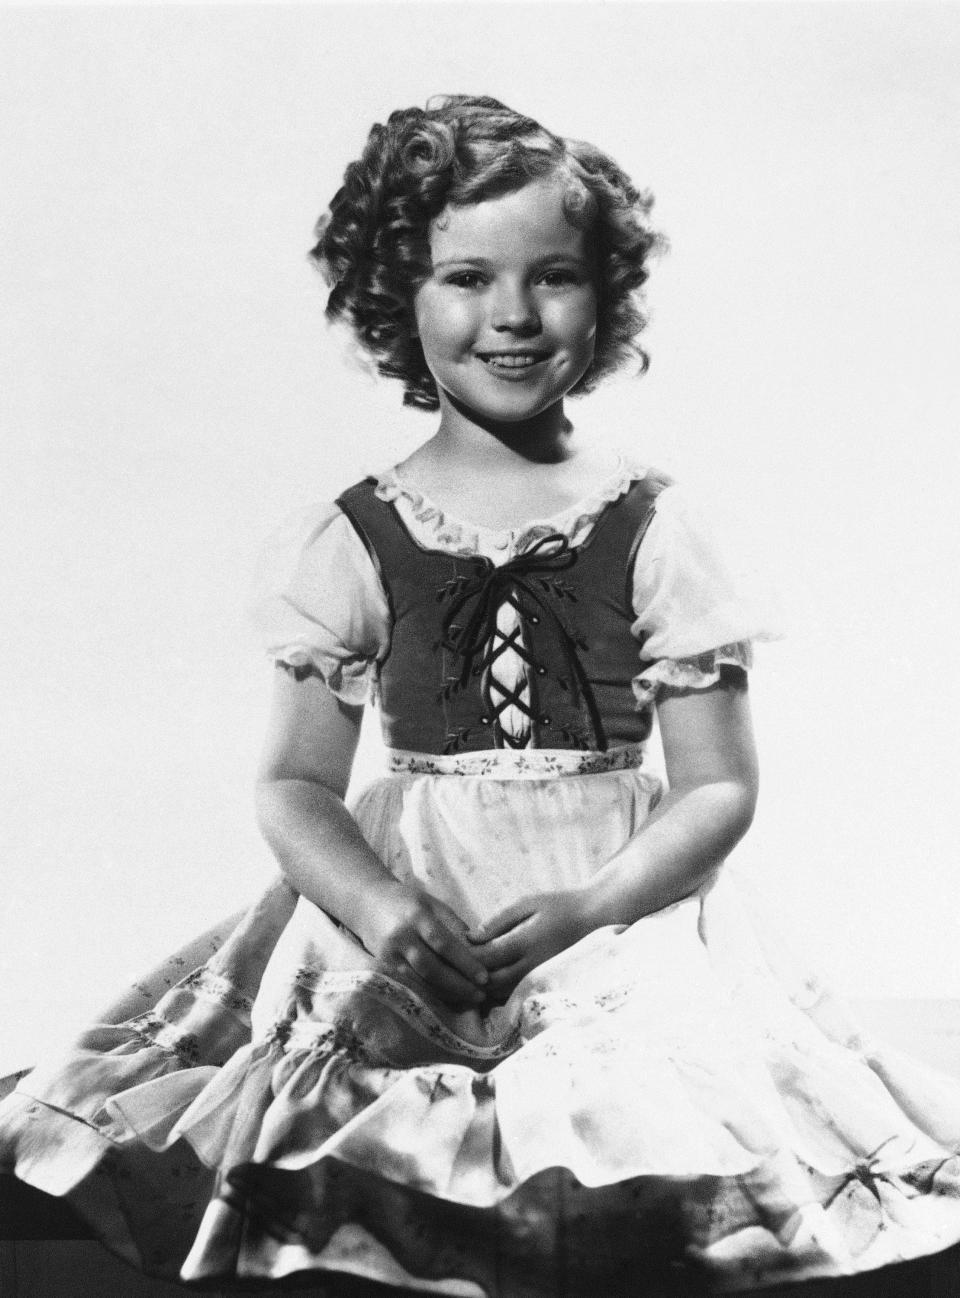 Shirley Temple Black, iconic child star and former U.S. ambassador to Ghana and Czechoslovakia, <a href="http://www.huffingtonpost.com/2014/02/11/shirley-temple-dead-child-star-ambassador-dies_n_4765333.html?1392116282&ncid=edlinkusaolp00000009" target="_blank">died on Feb. 10, 2014 in California</a>, The Associated Press reported. Her cause of death was not released. She was 85.